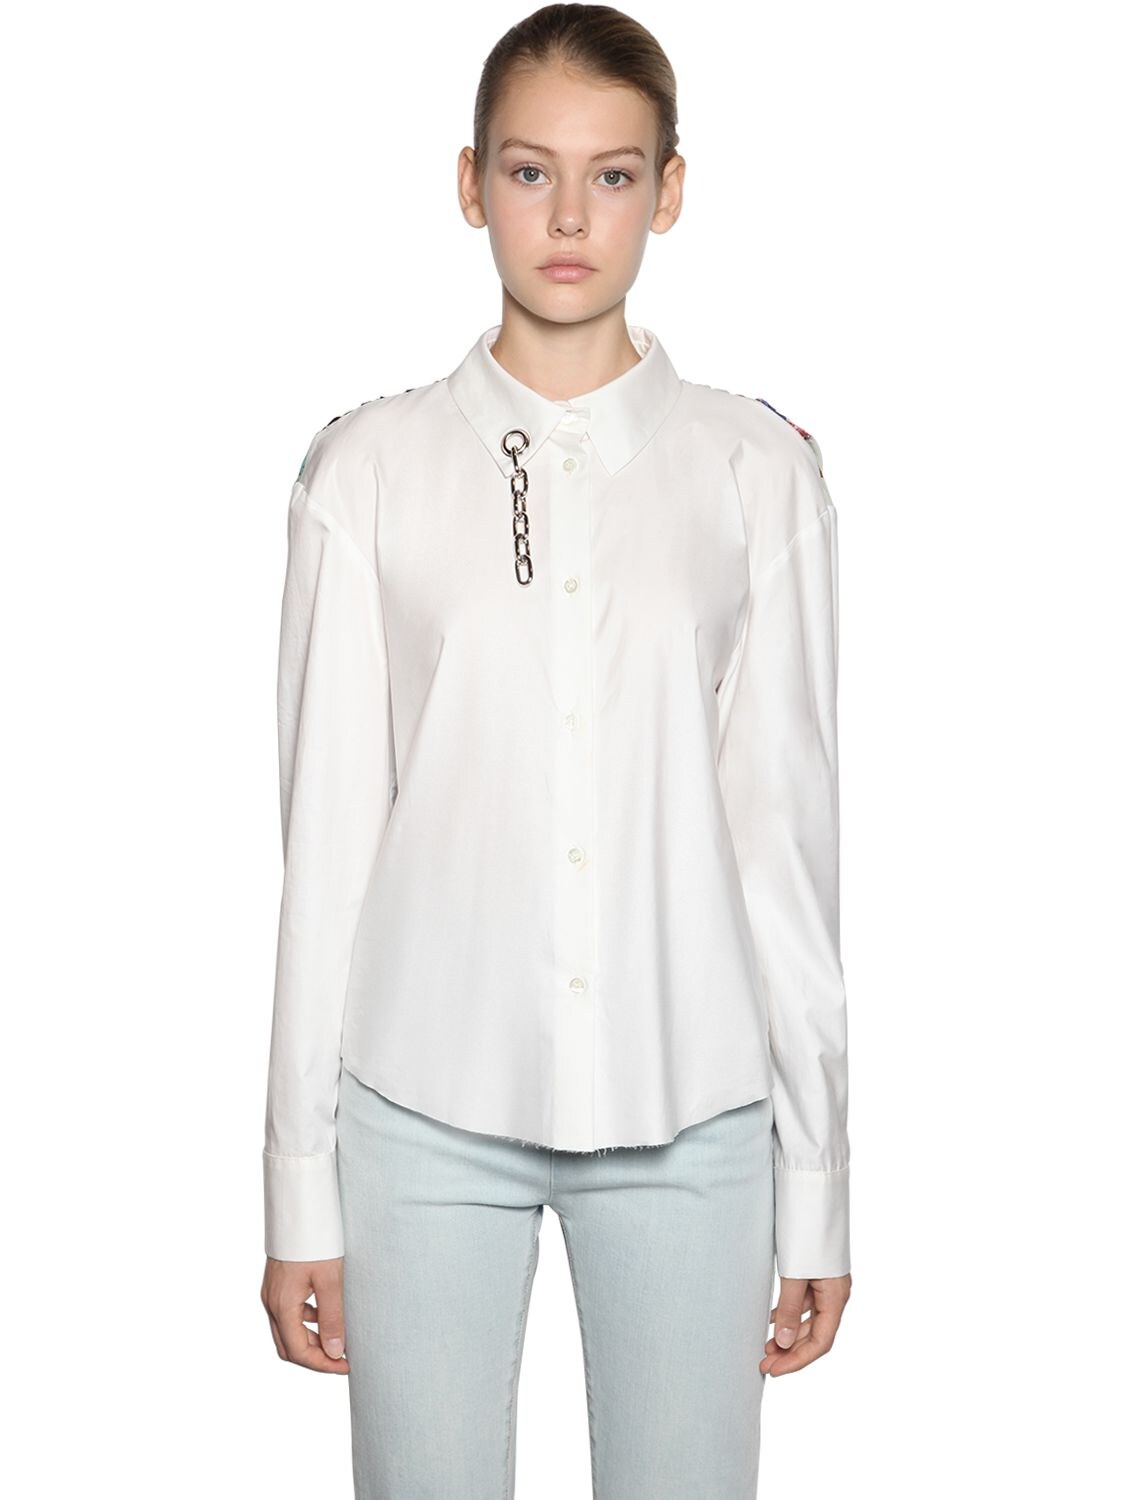 Act N°1 Patchwork Crepe & Cotton Shirt In White,multi